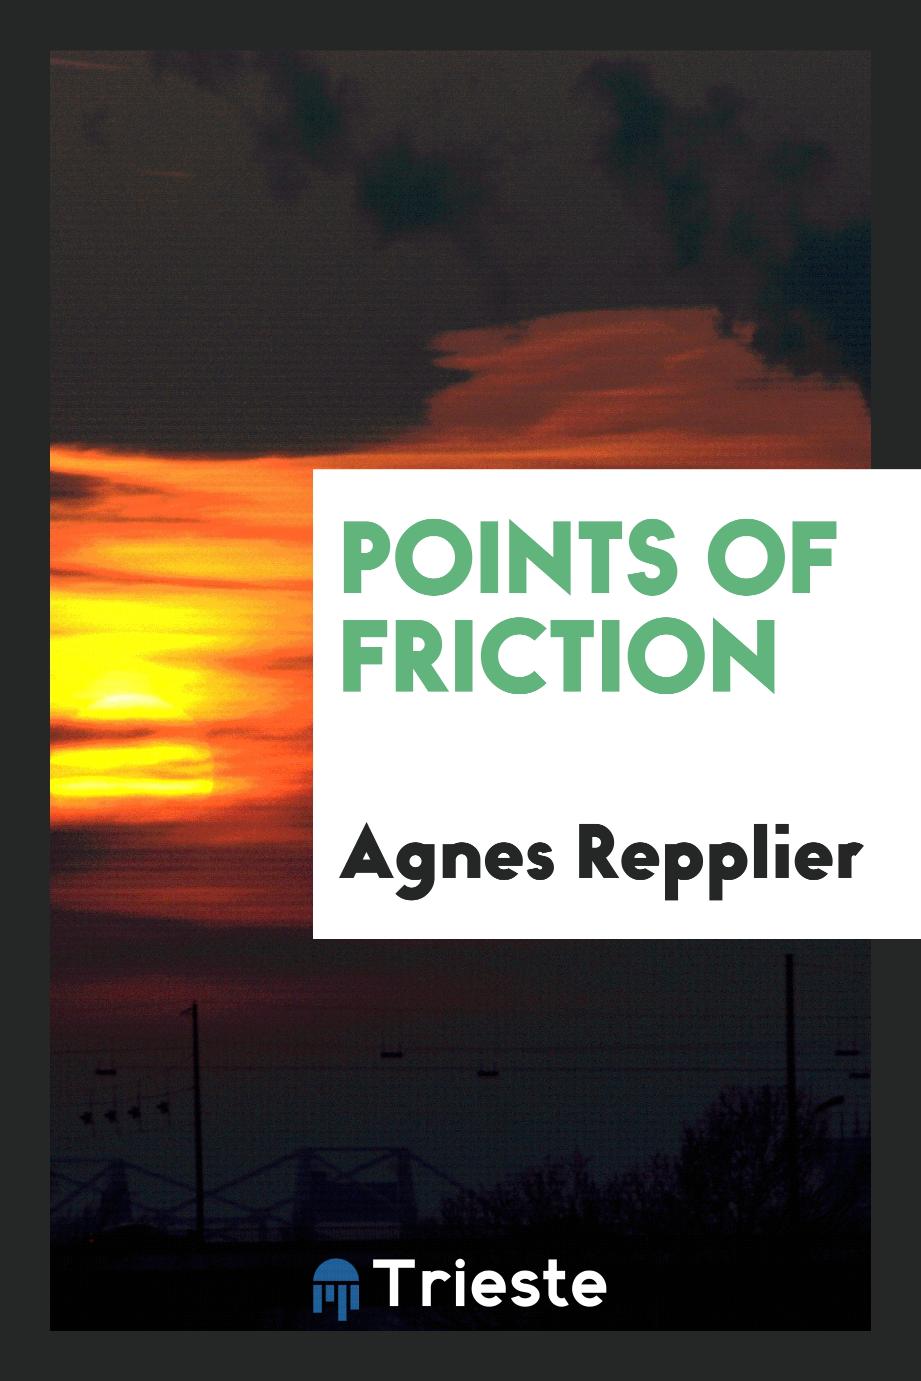 Points of friction